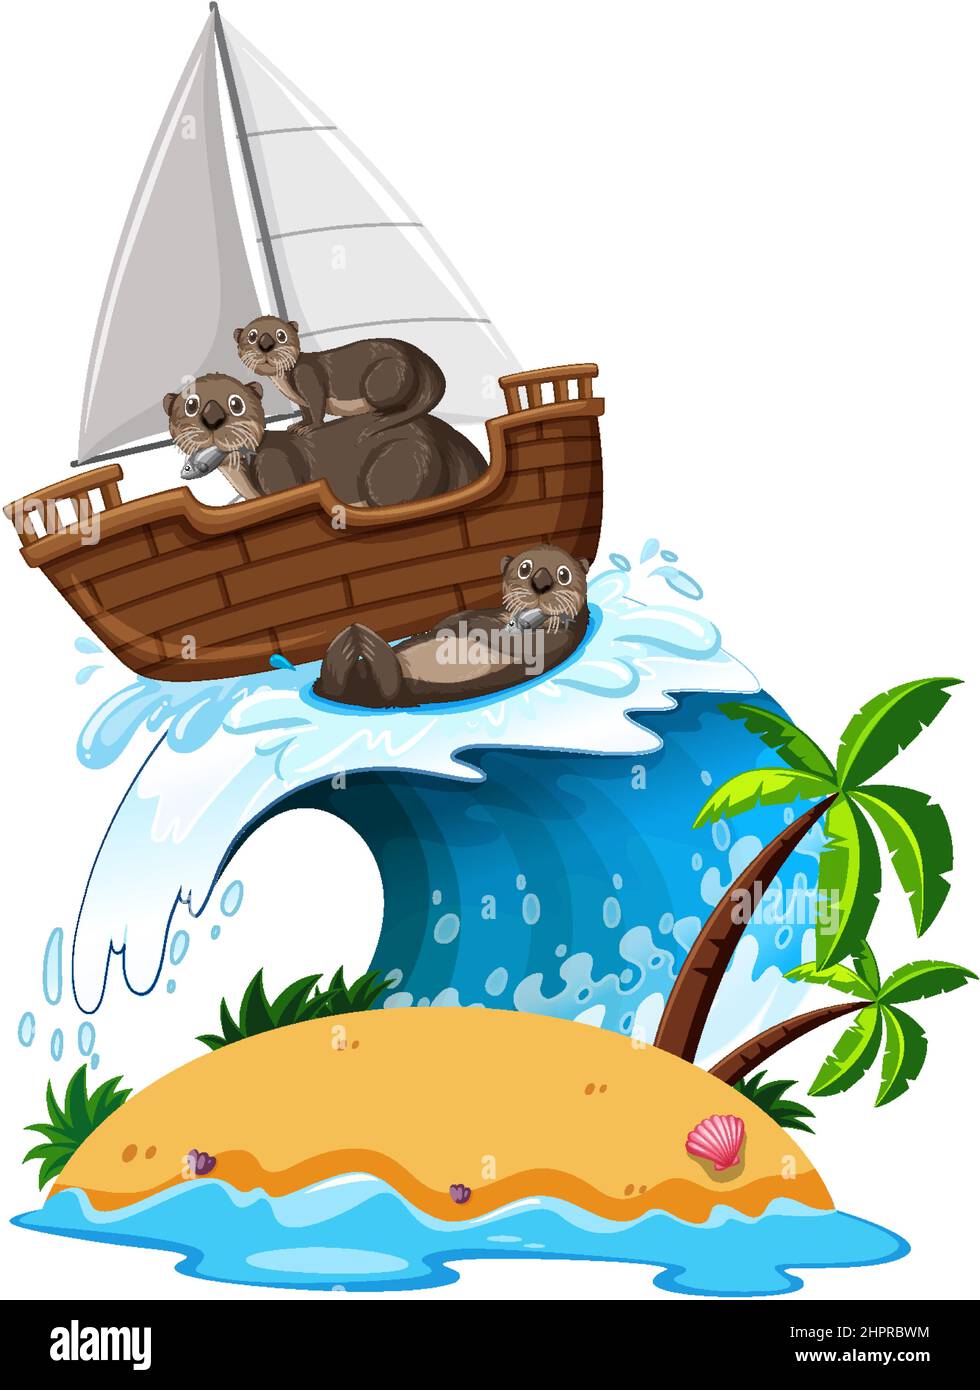 Otters on sailboat with ocean wave illustration Stock Vector